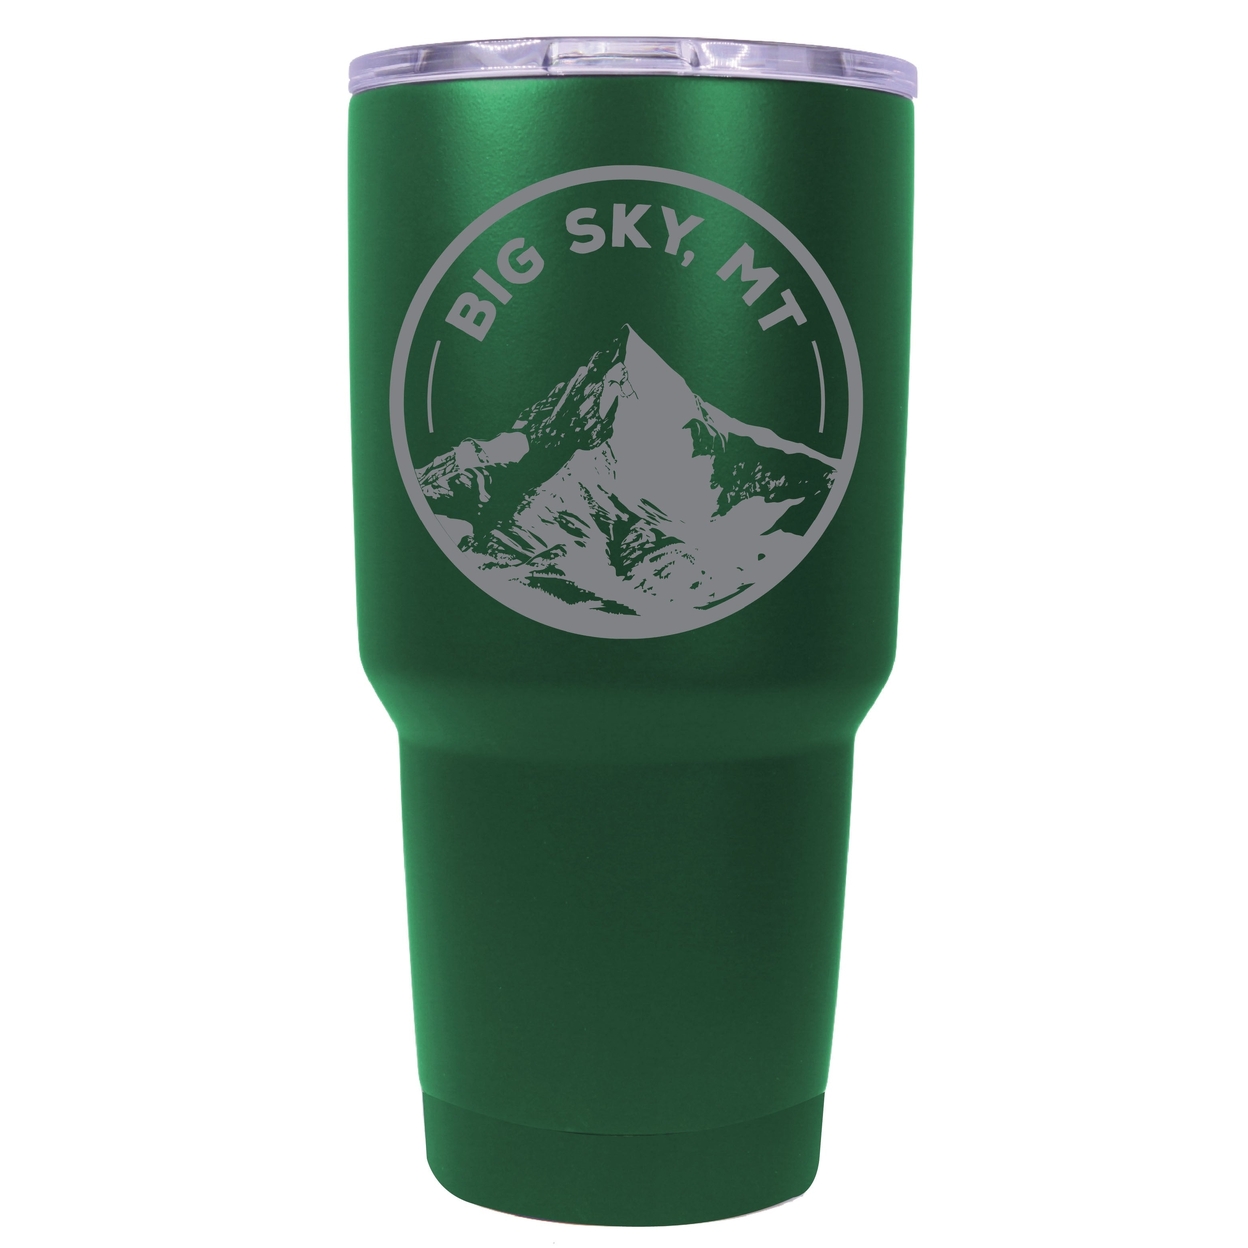 Big Sky Montana Souvenir 24 Oz Engraved Insulated Stainless Steel Tumbler - Green,,2-Pack